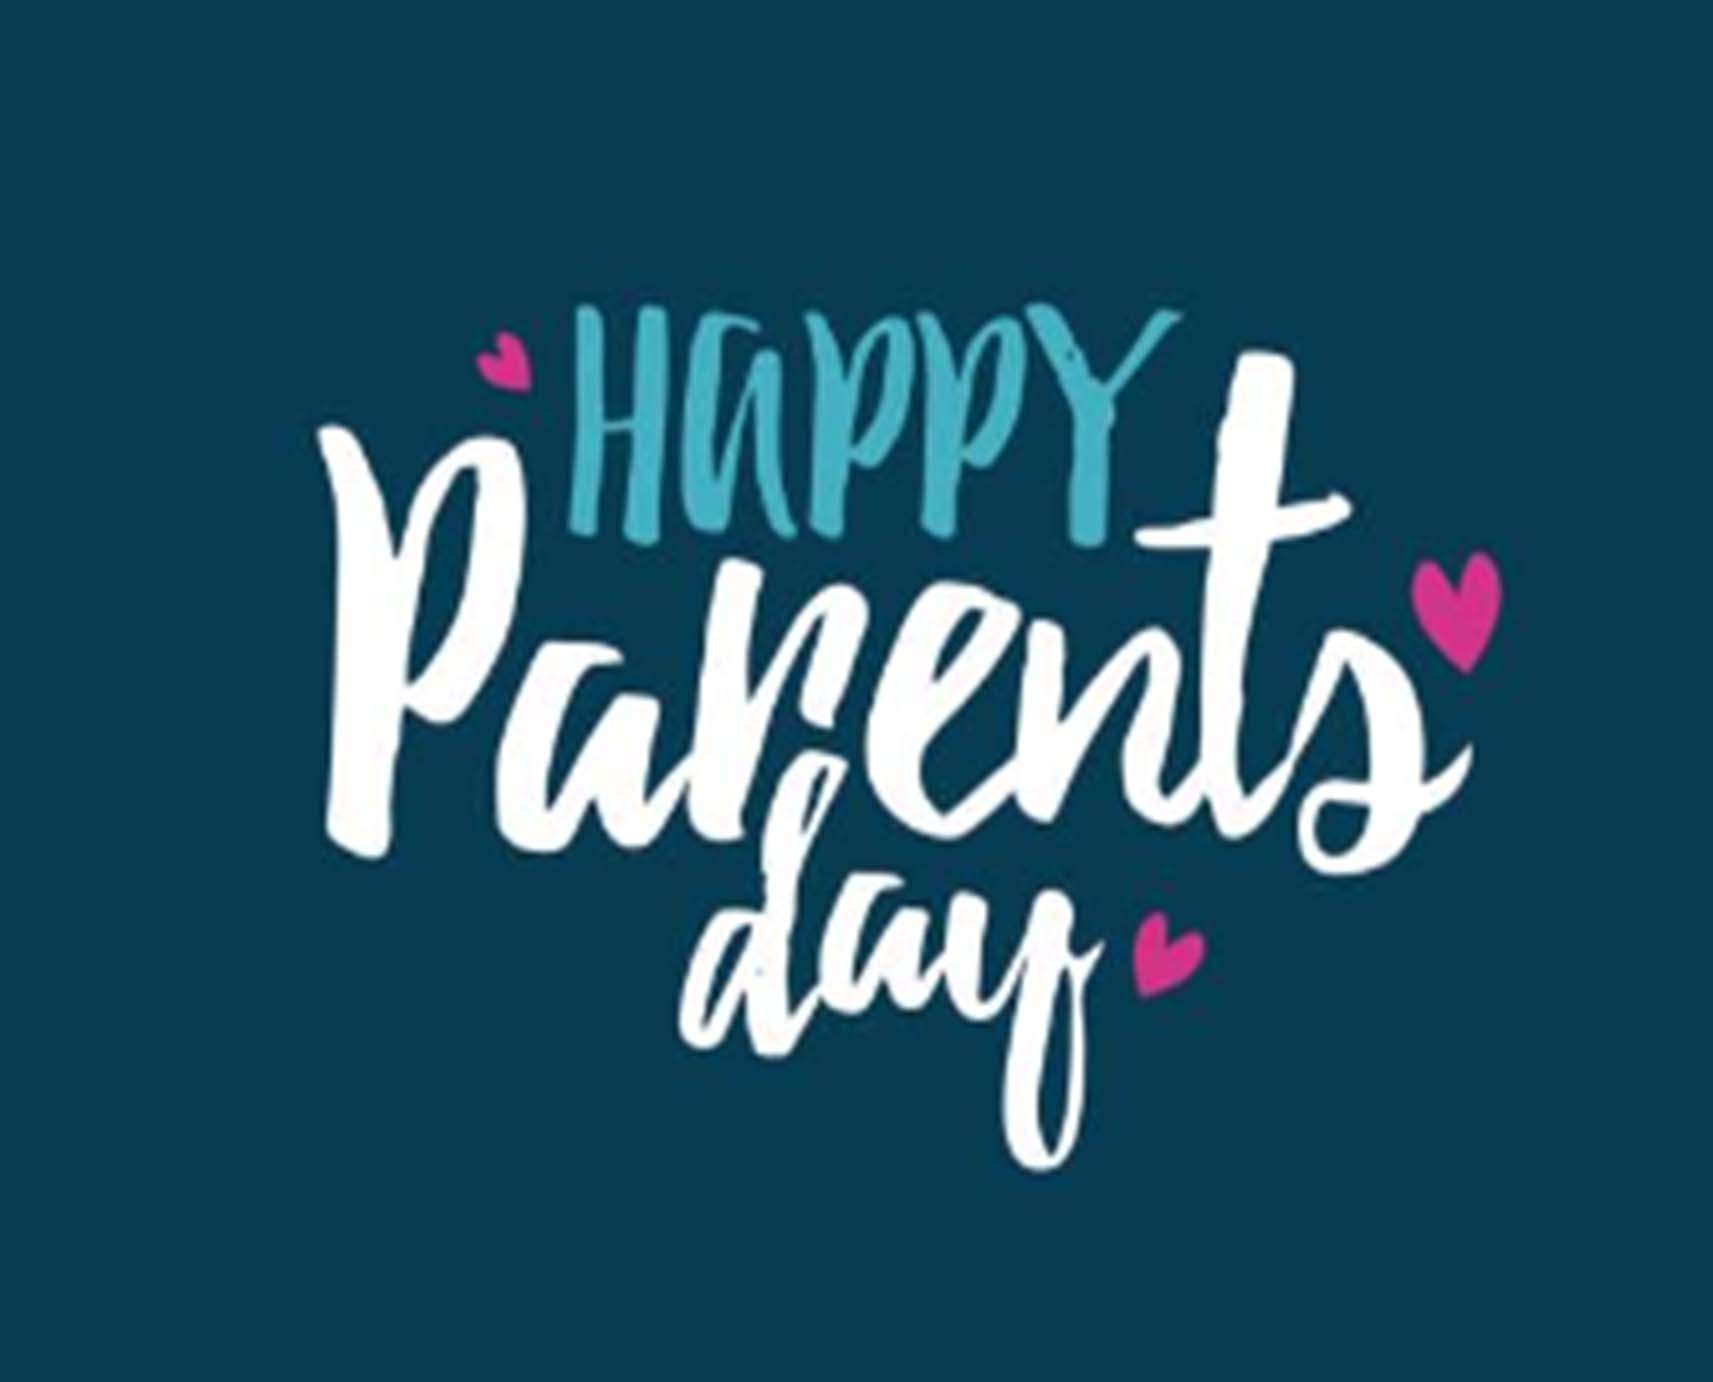 Parents' Day in the United States